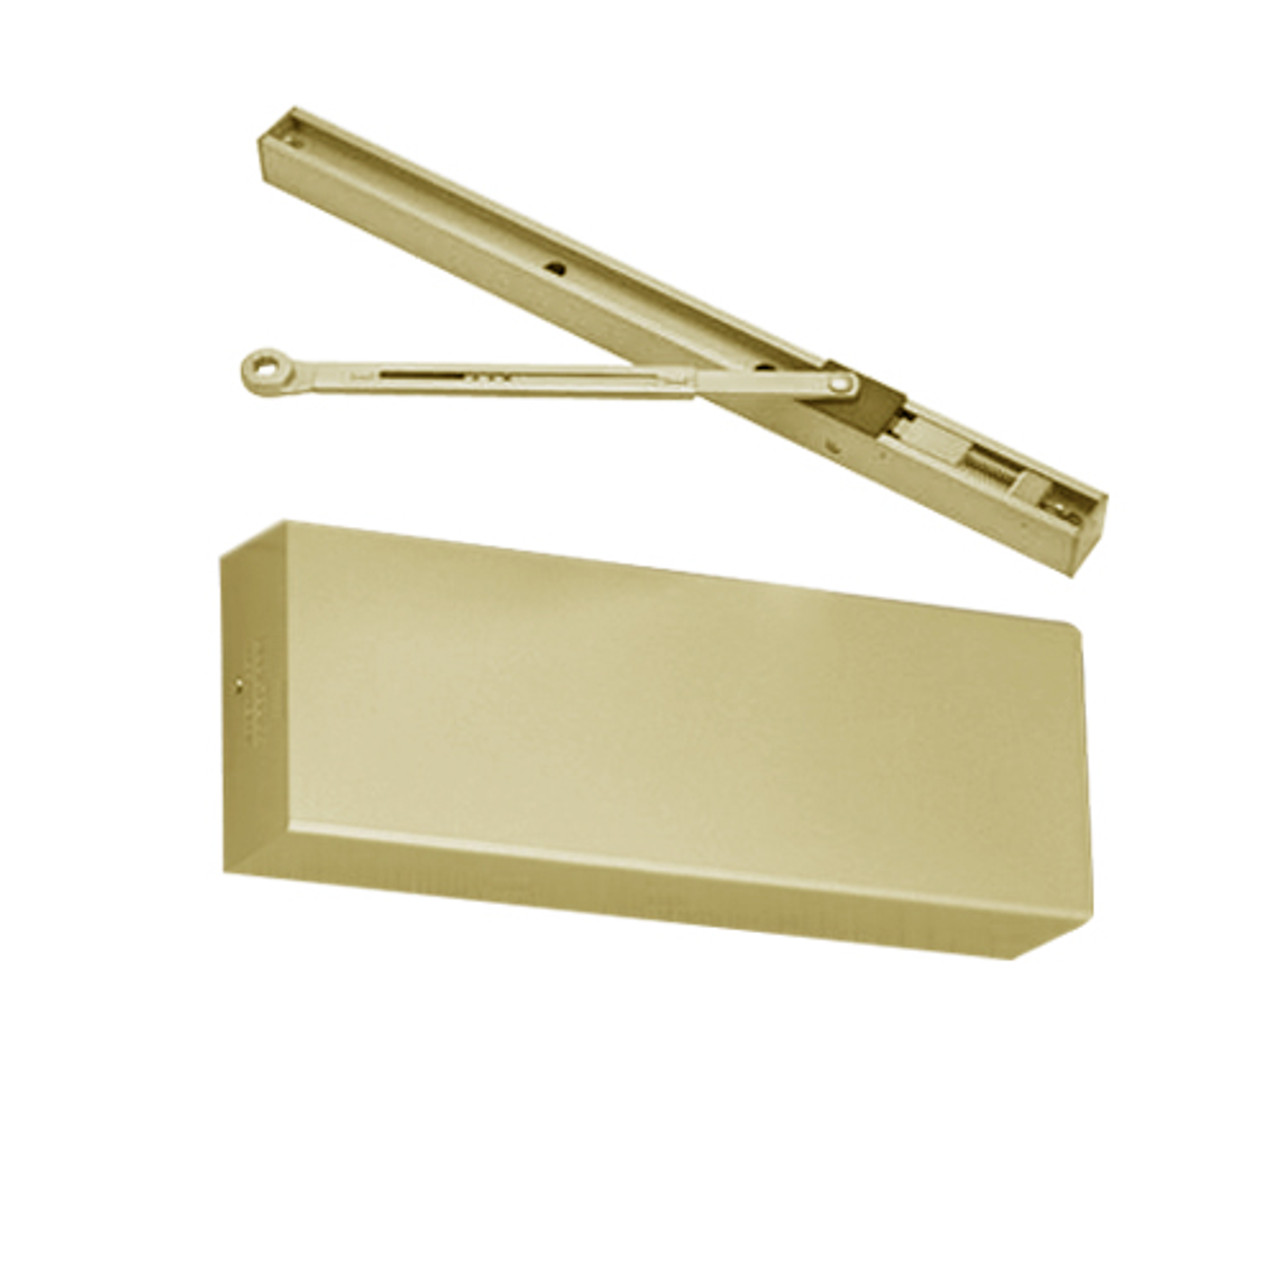 PS9500STHDA-696 Norton 9500 Series Hold Open Cast Iron Door Closer with Push Side Slide Track in Gold Finish